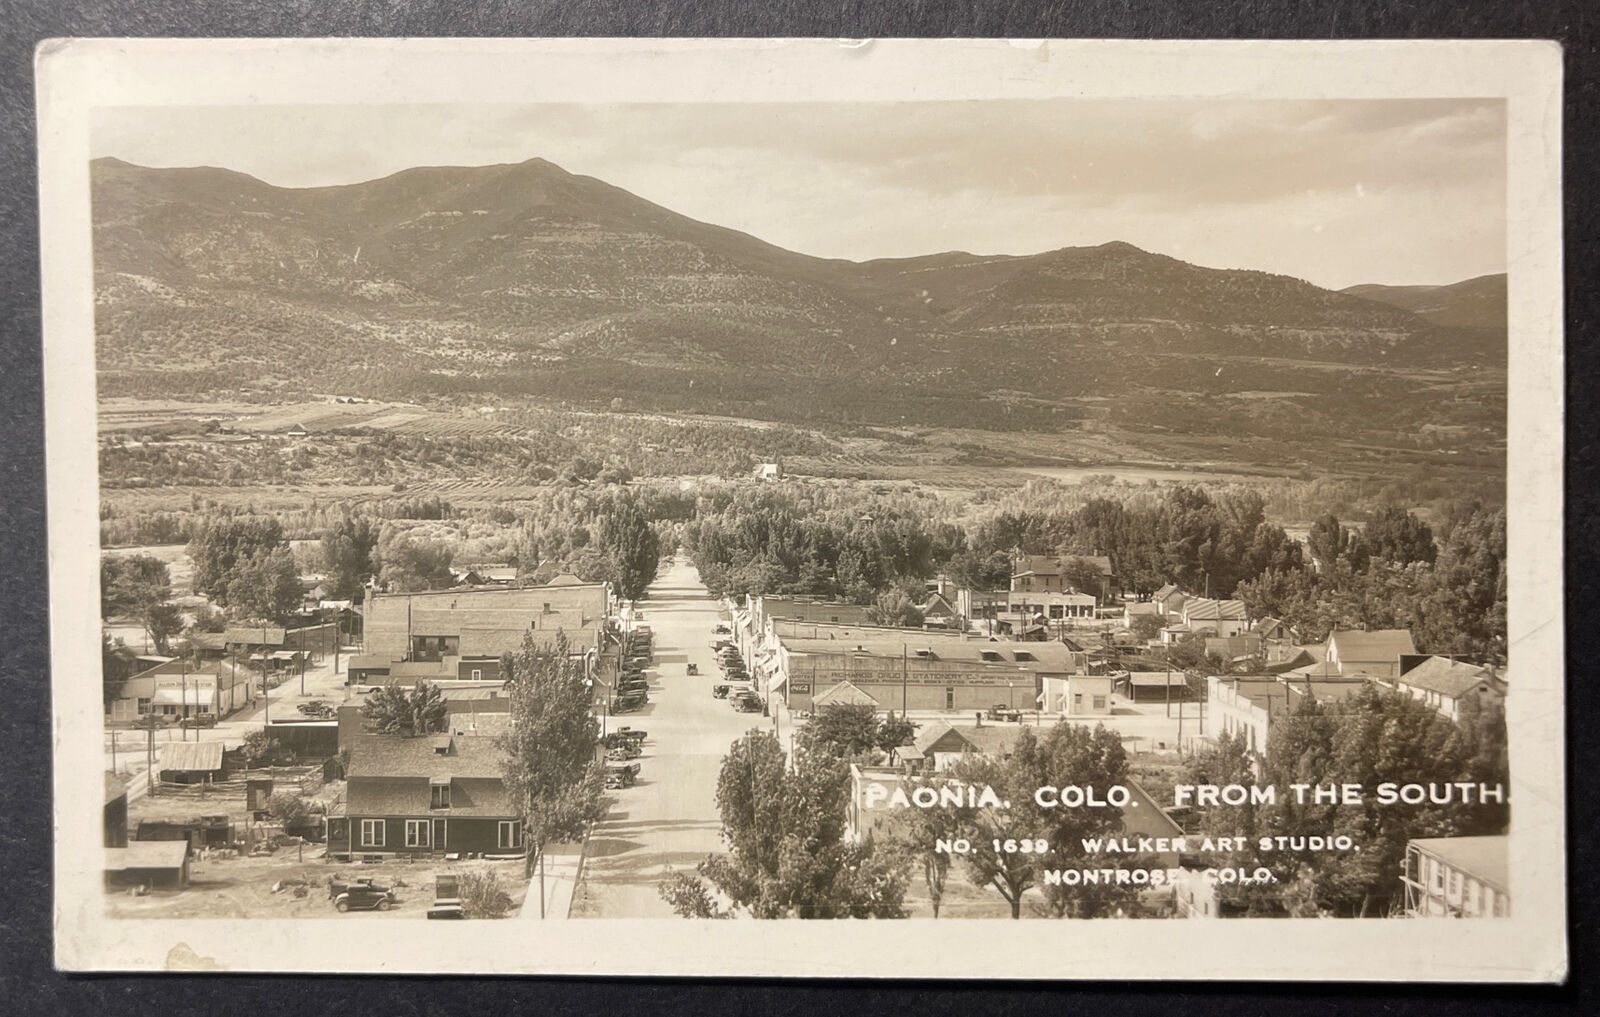 Paonia Colo from the South Paonia Colorado RPPC Walker Art Studio Montrose